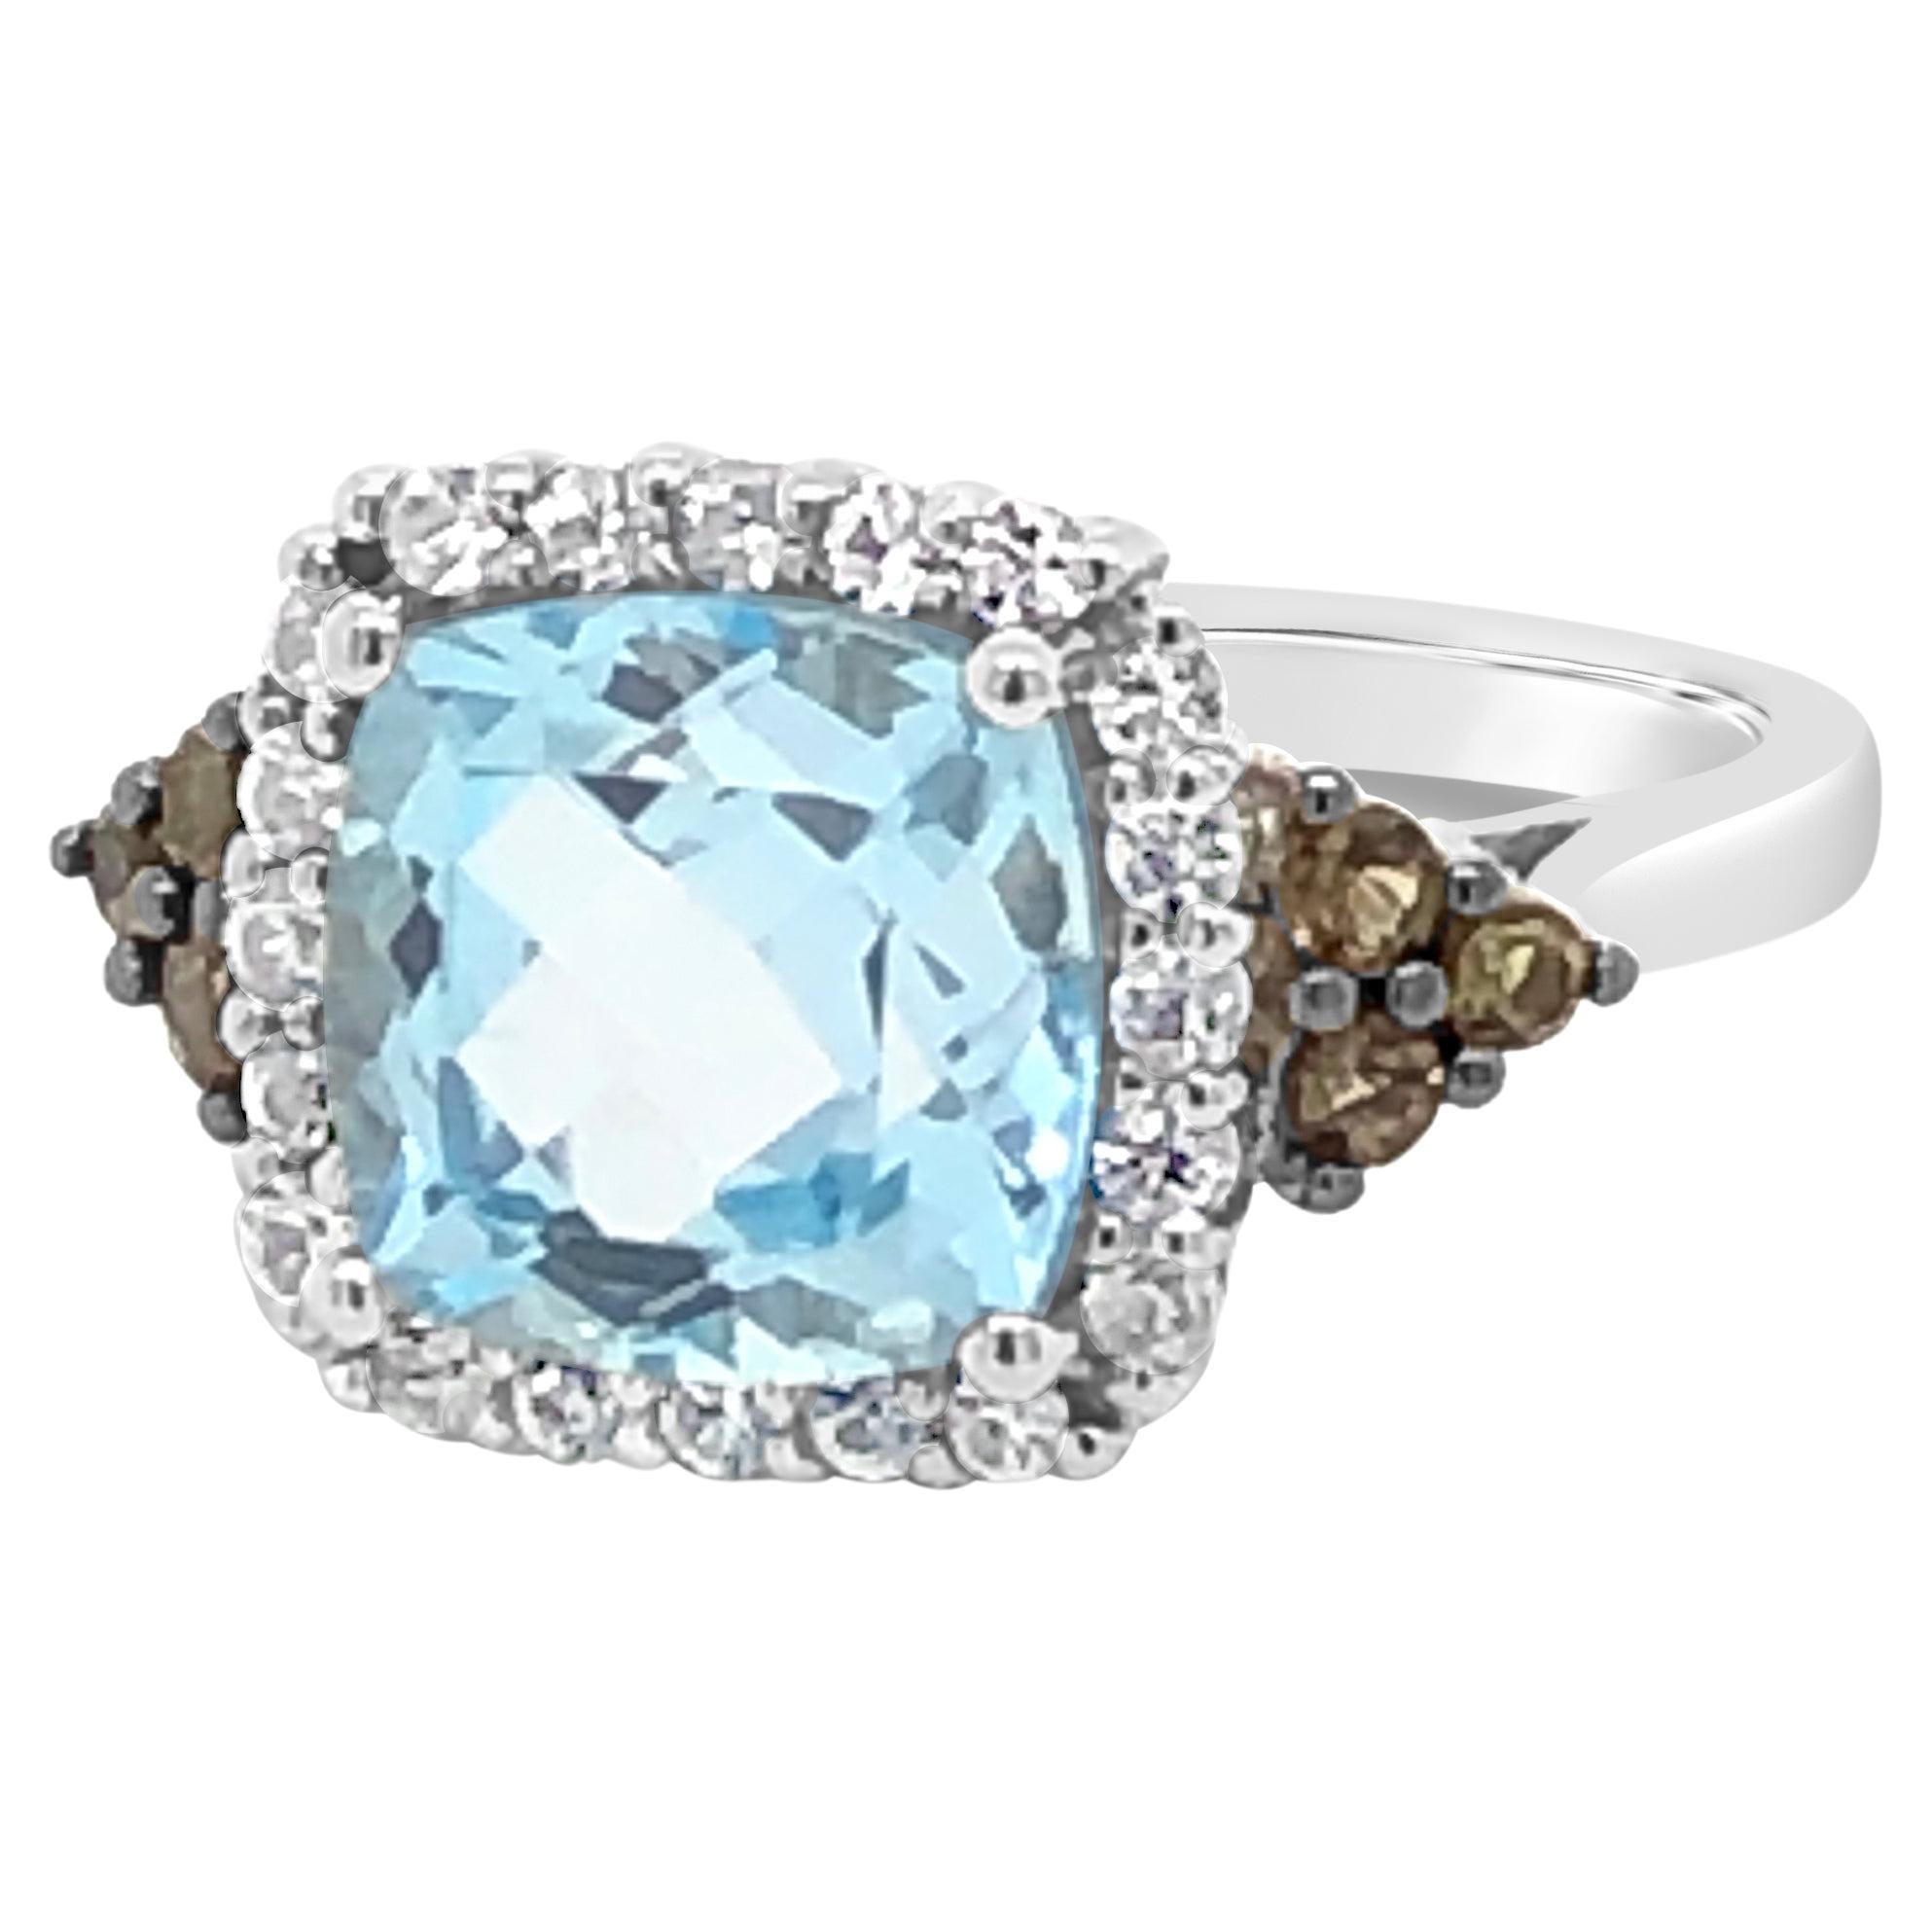 Le Vian Blue Topaz and Smoky Quartz Ring in 14K White Gold For Sale